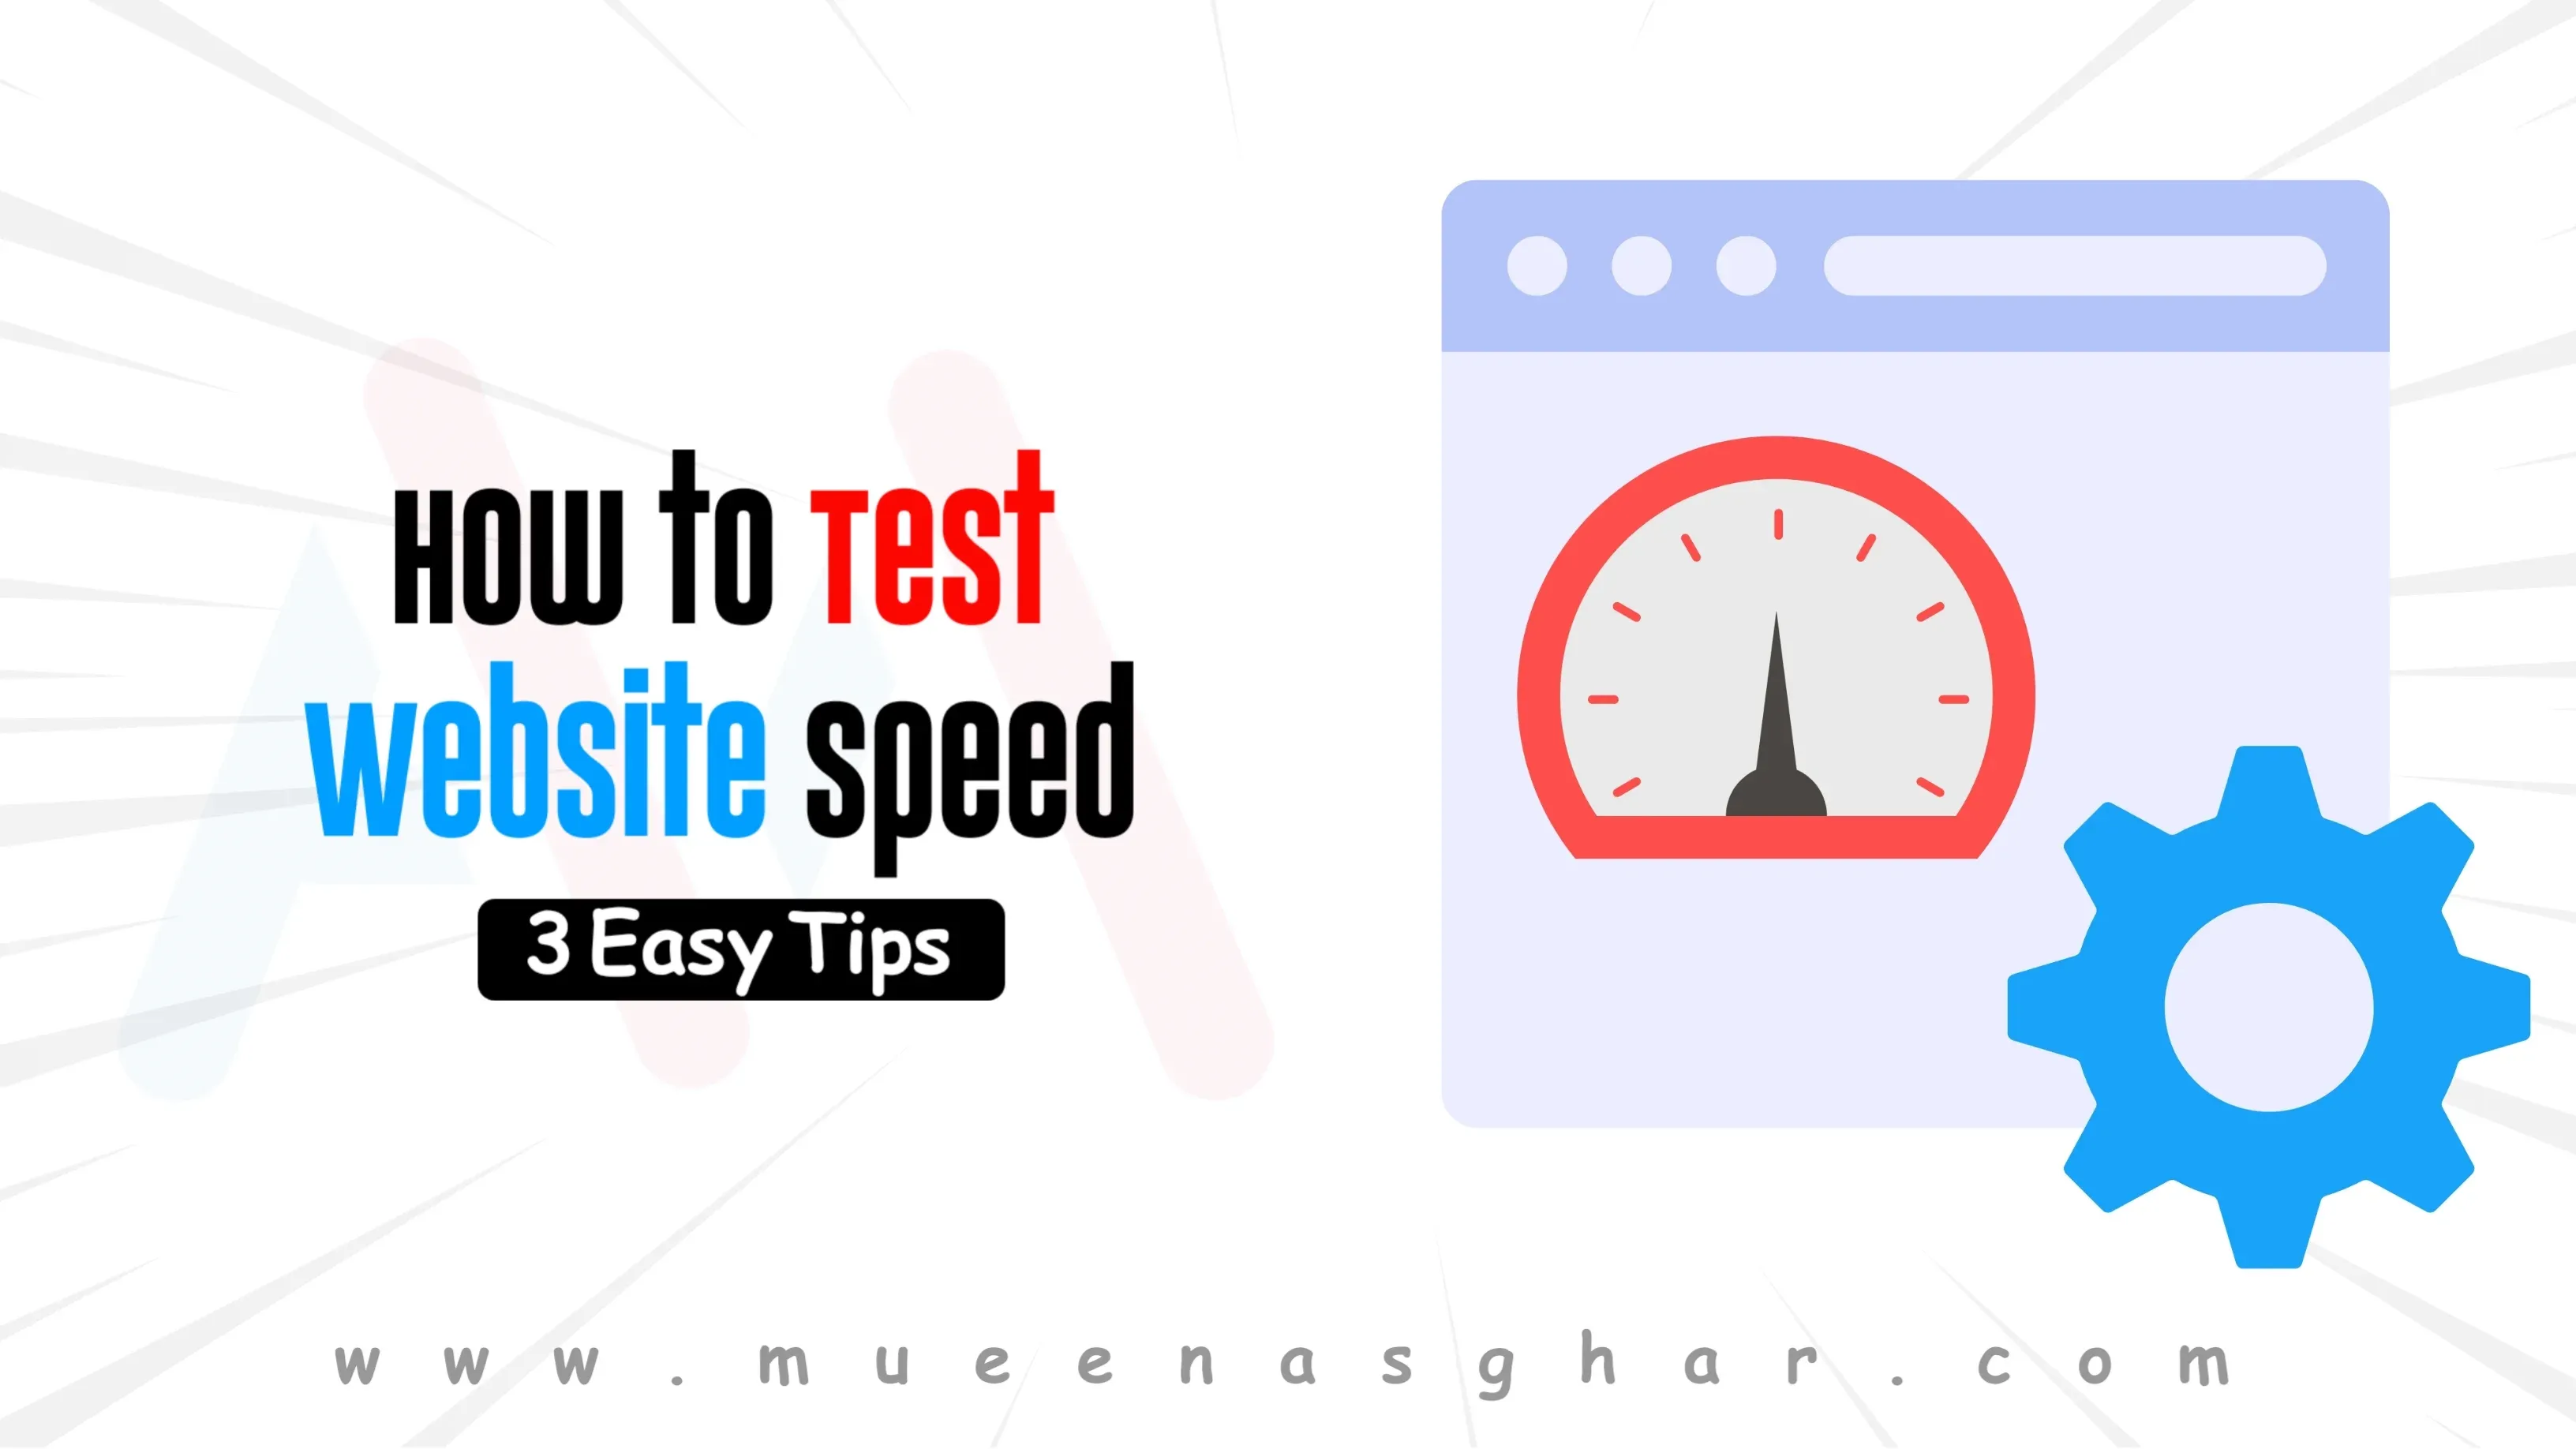 How to Test Website Speed: 3 Easy Tips